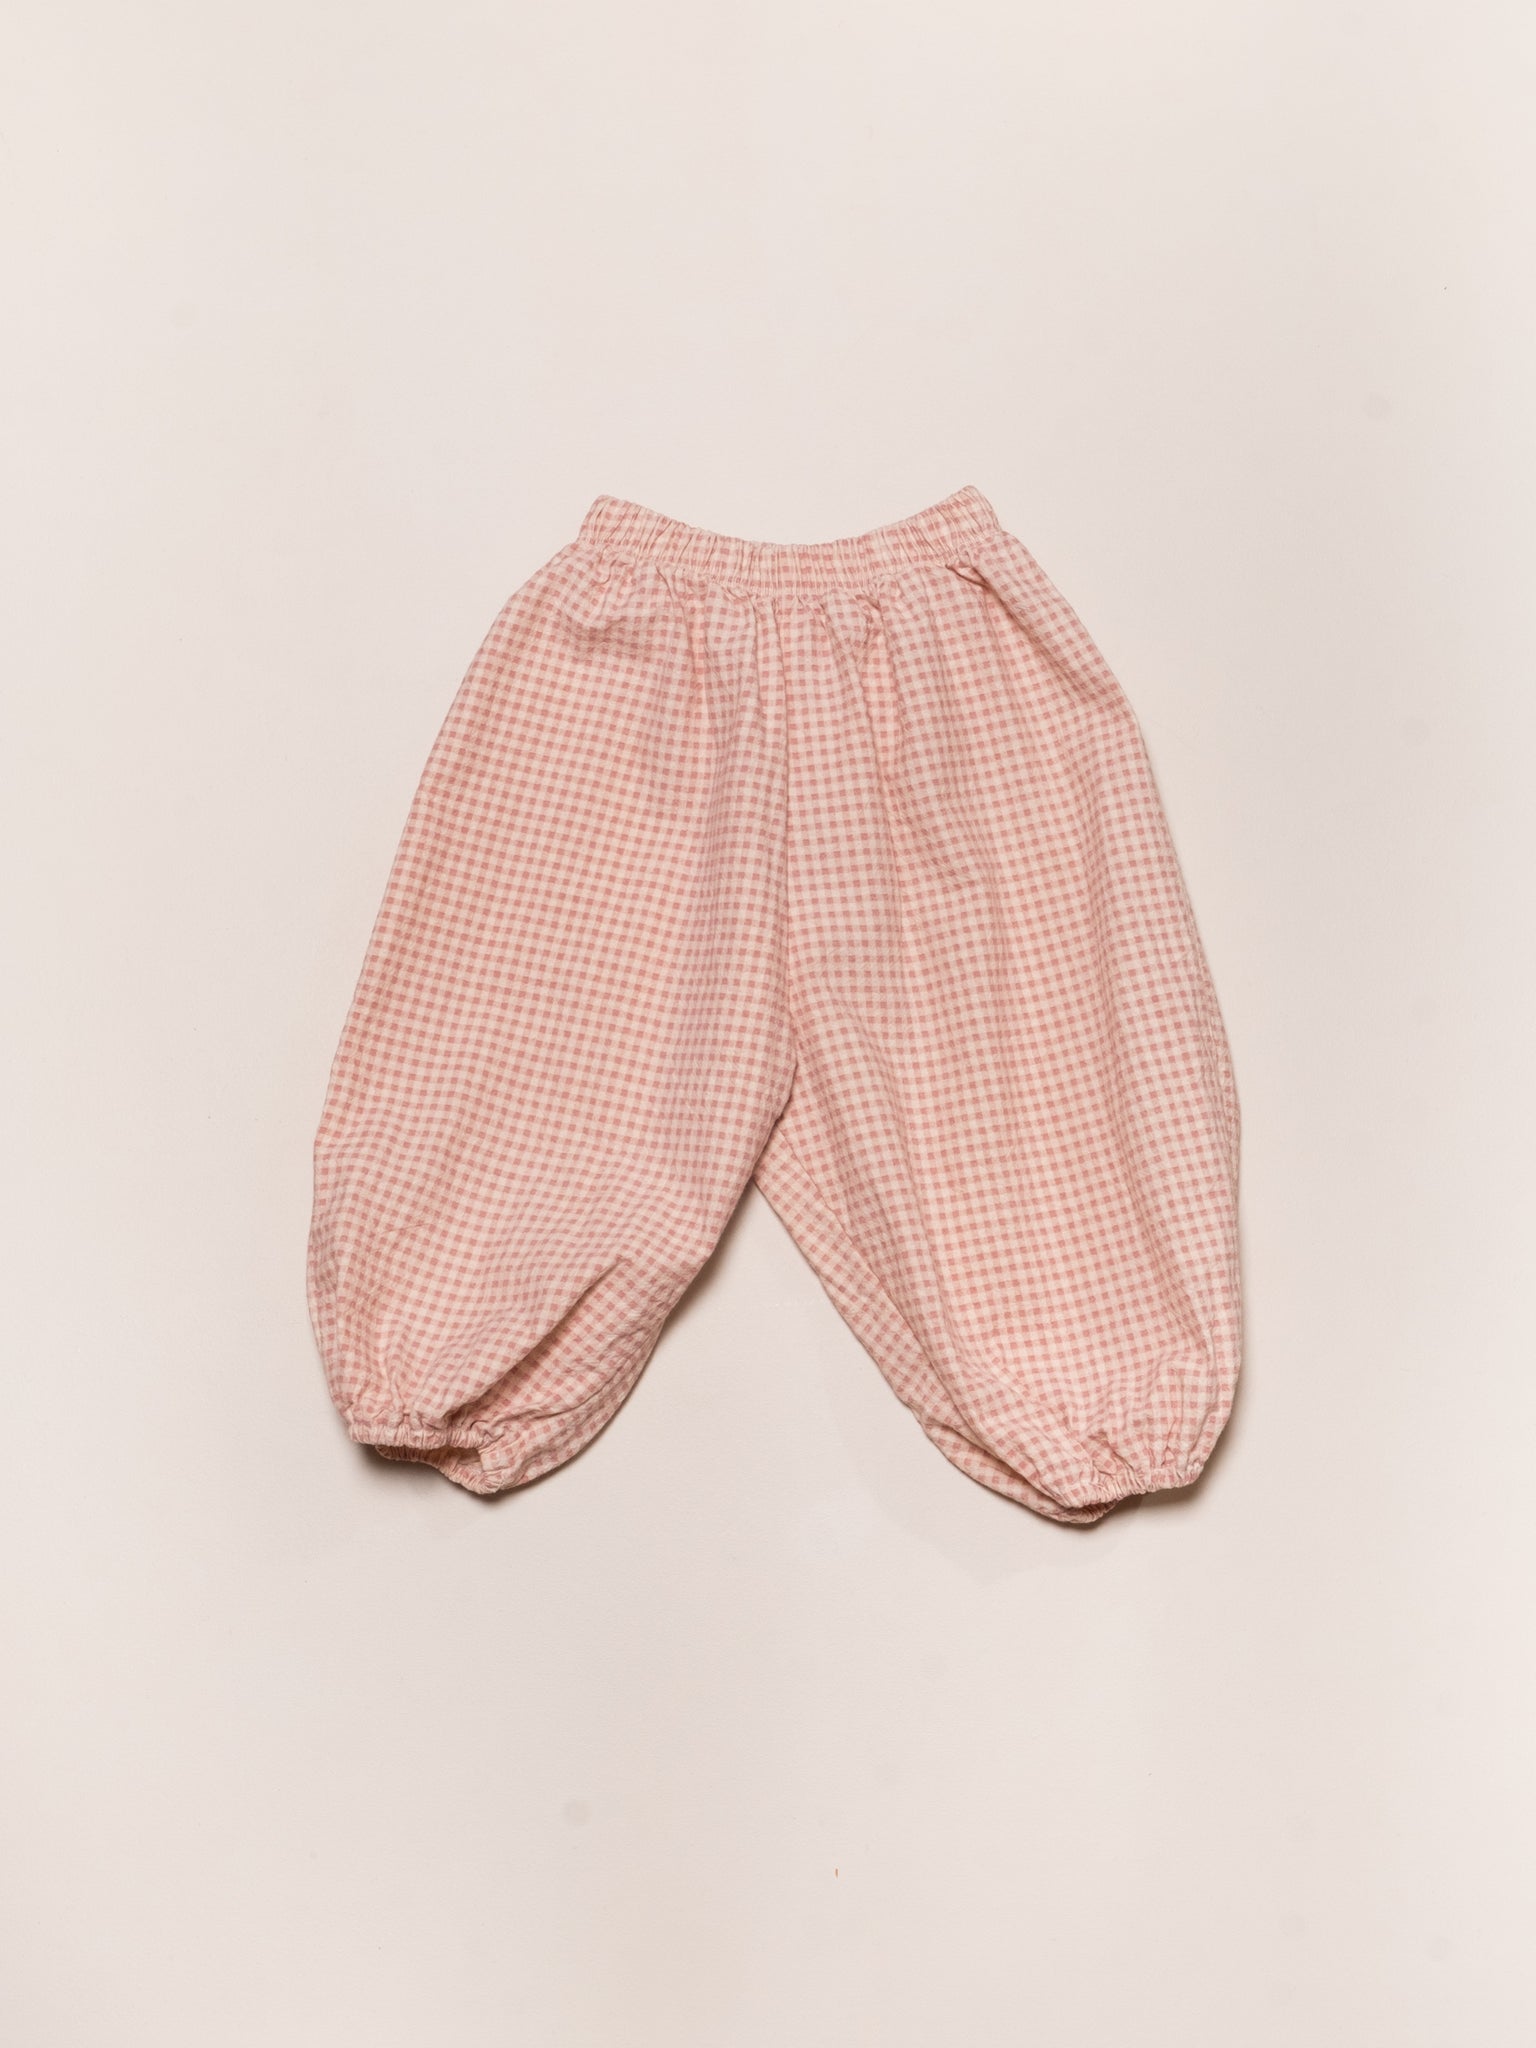 Spring bloomers - Pink gingham